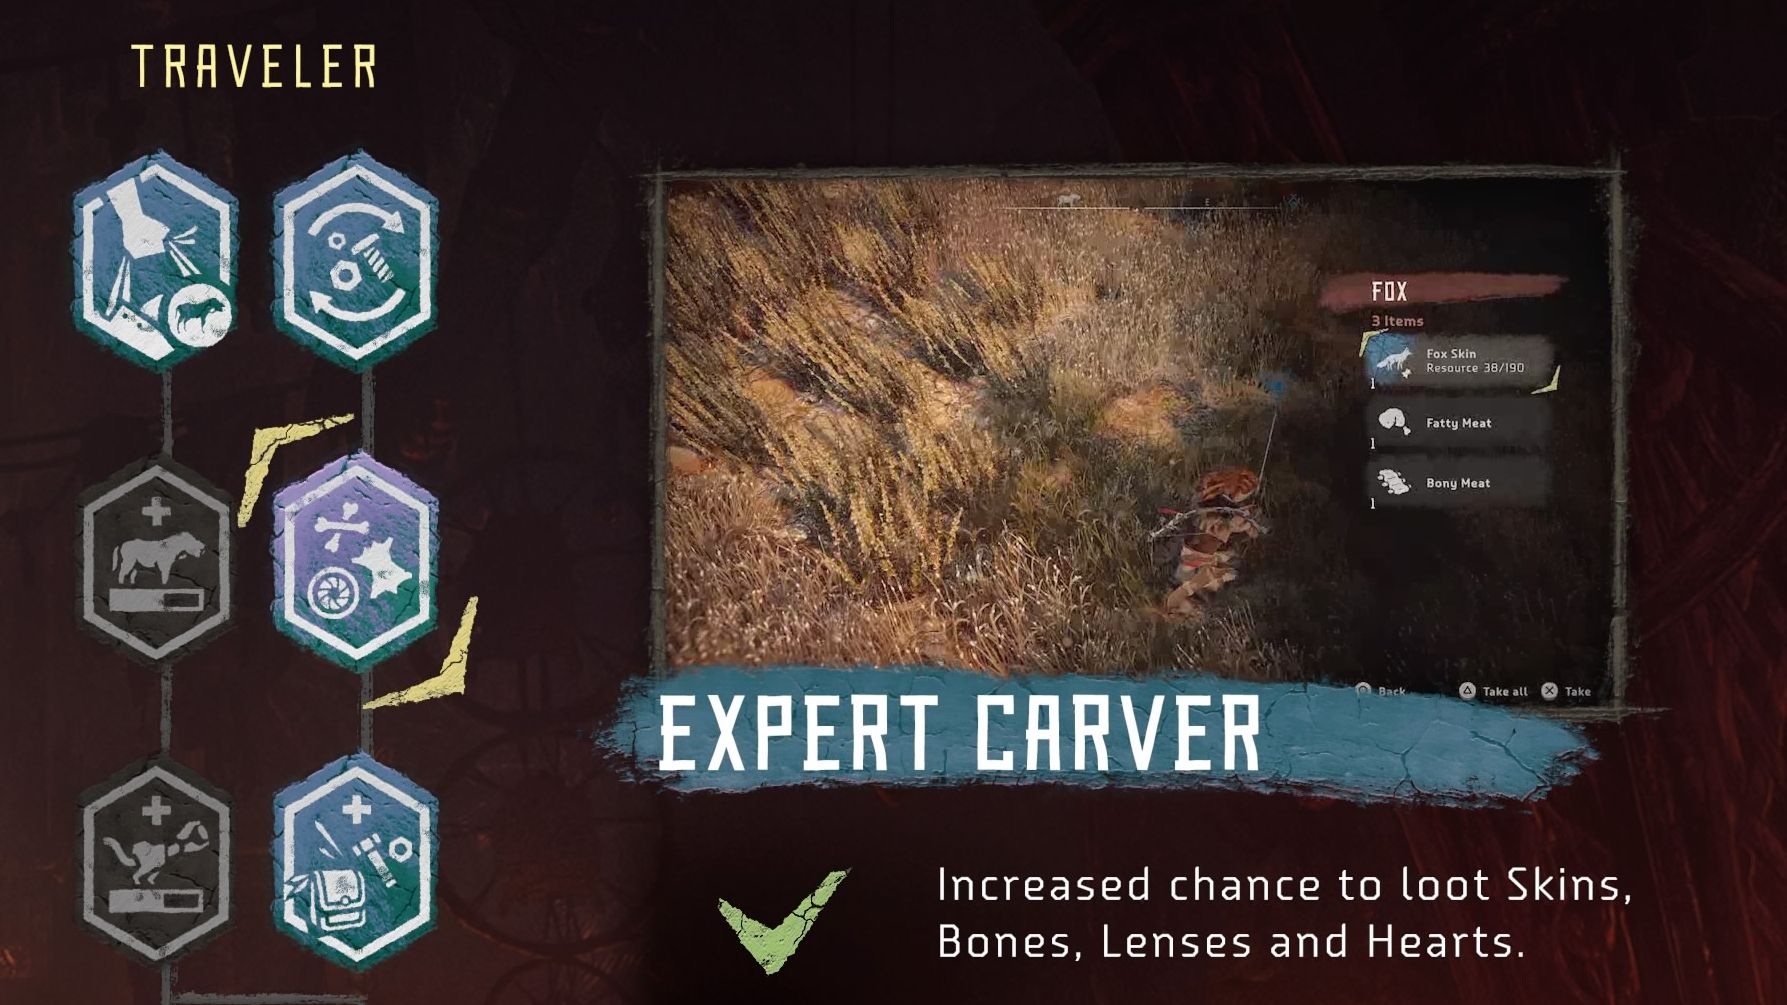 The Traveler Branch of the Skill Tree in Horizon Zero Dawn has the Expert Carver Skill for Hunting